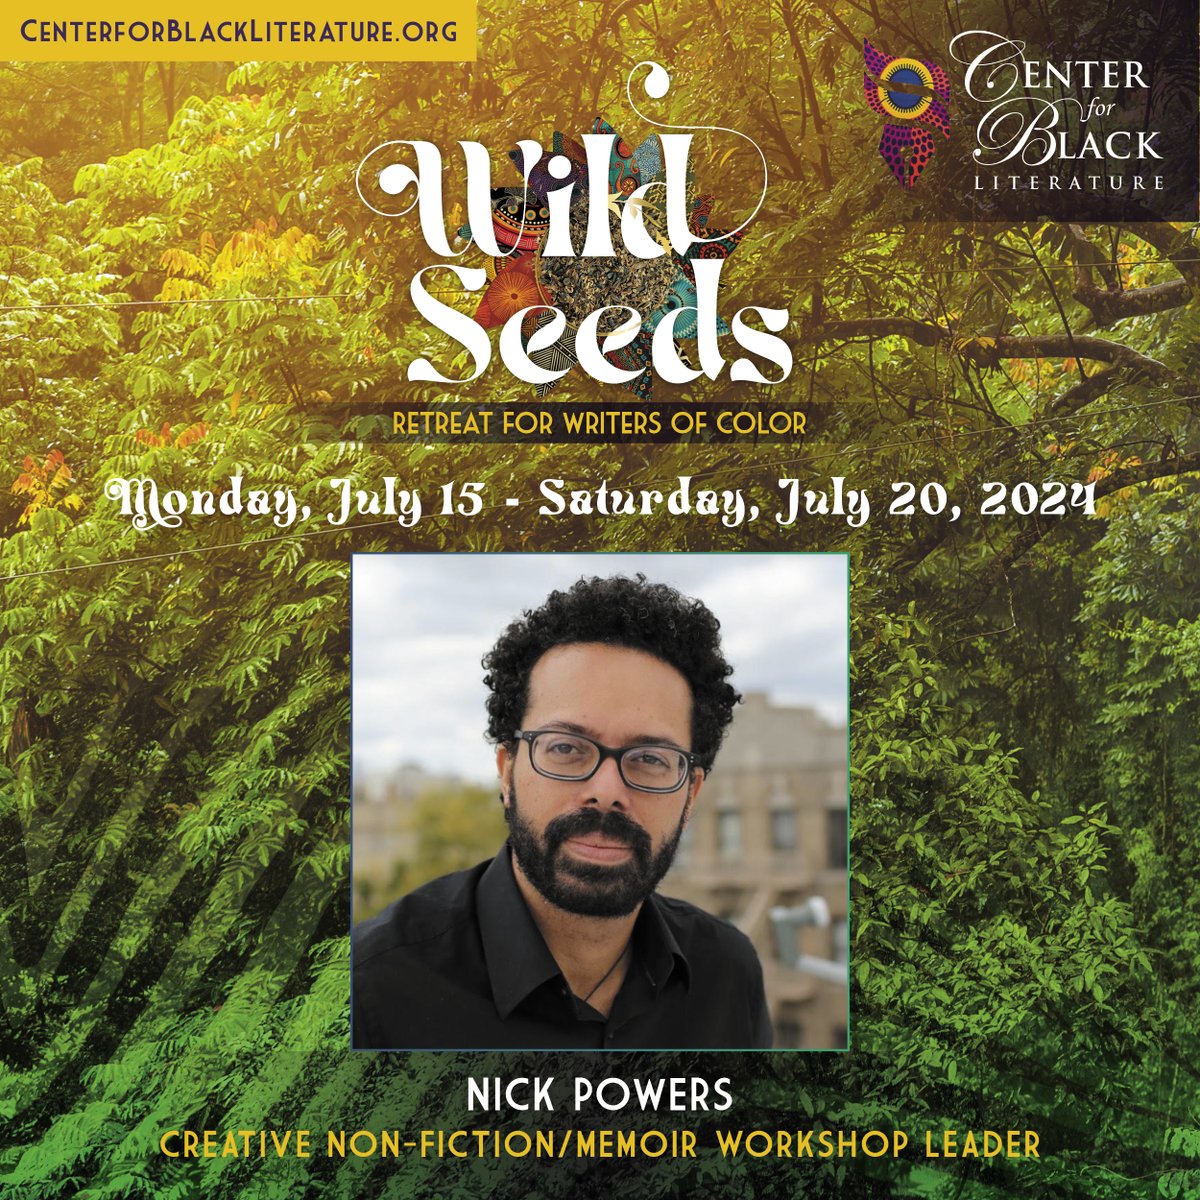 We are excited to welcome #NicholasPowers as the Creative Non-Fiction/#Memoir Workshop Leader for the Summer 2024 #WildSeedsRetreatForWritersOfColor. The submission deadline is Friday, May 17, 2024. #CenterforBlackLiterature #BlackWritersMatter